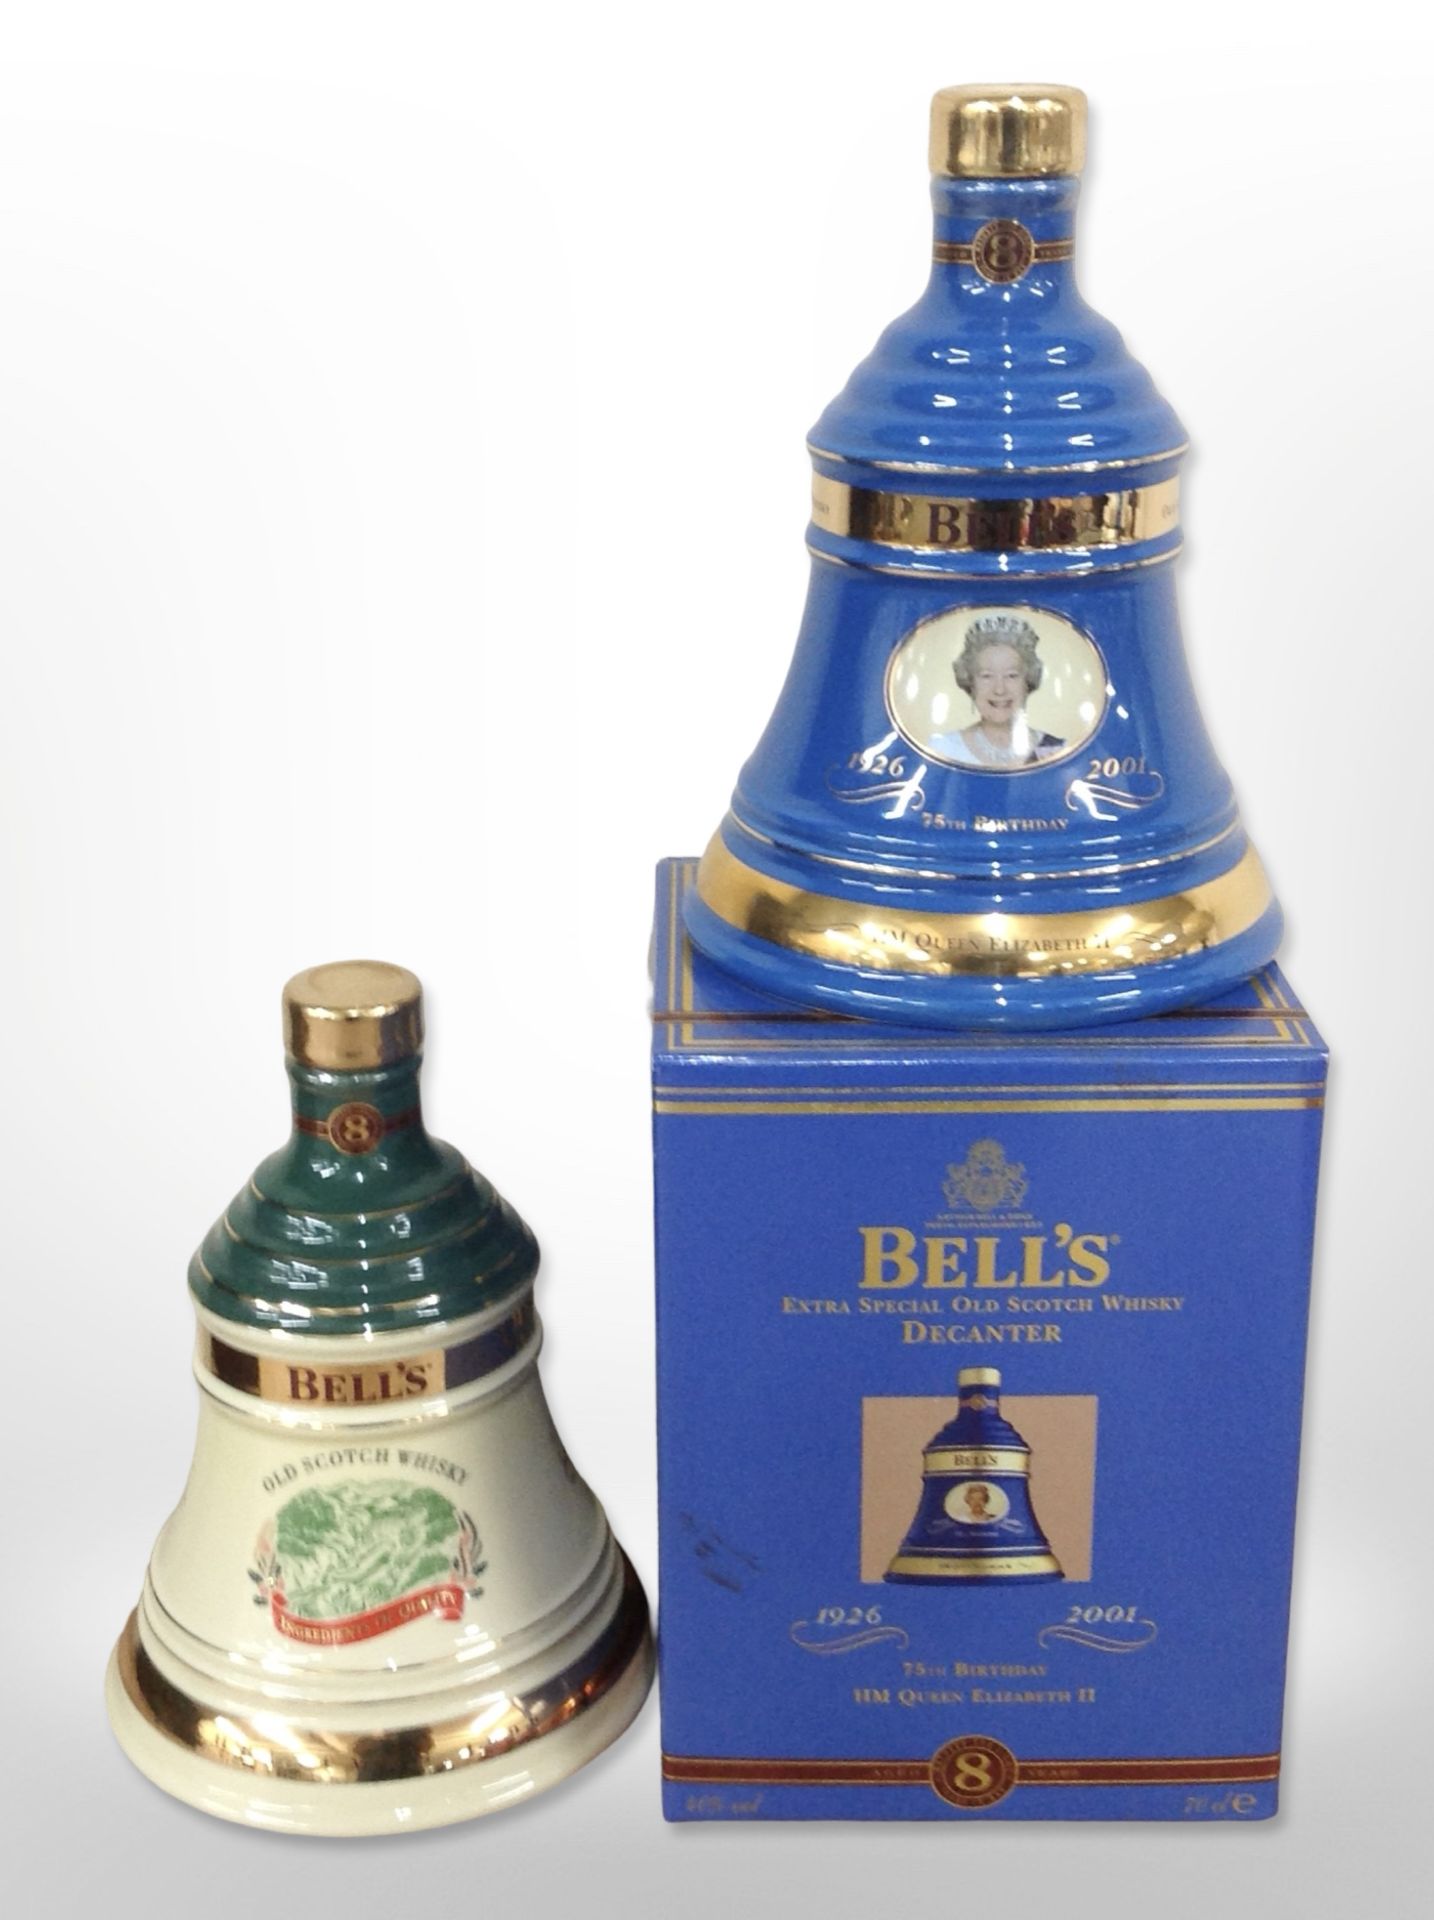 A Bell's Extra Special Old Scotch Whisky decanter, Queen Elizabeth II's 75th birthday,